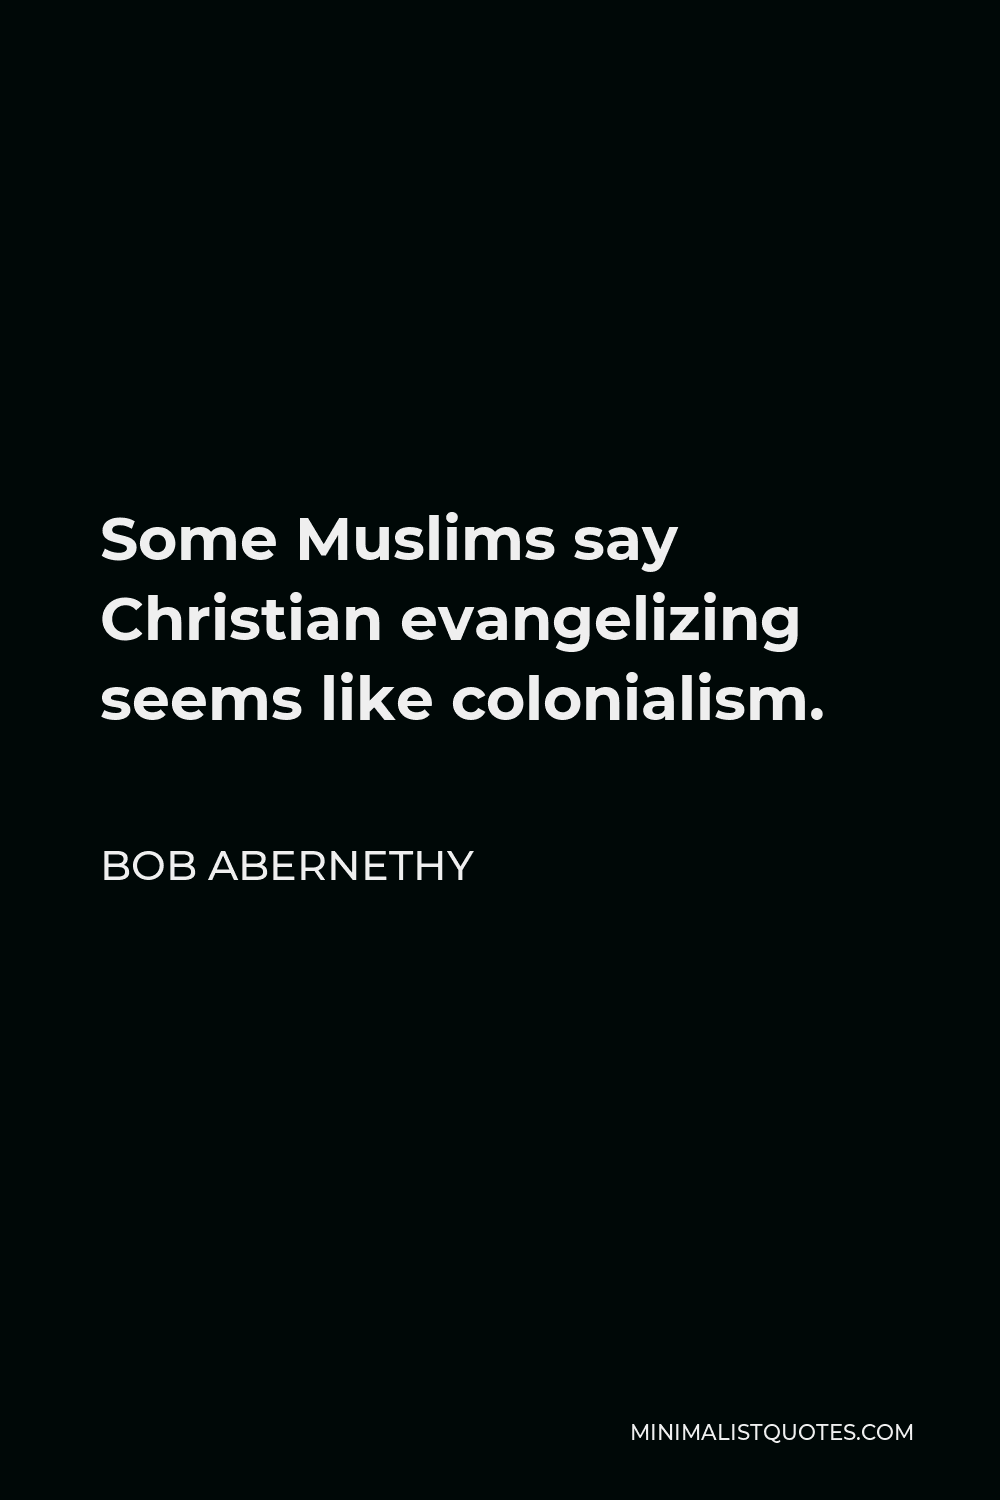 Bob Abernethy Quote - Some Muslims say Christian evangelizing seems like colonialism.